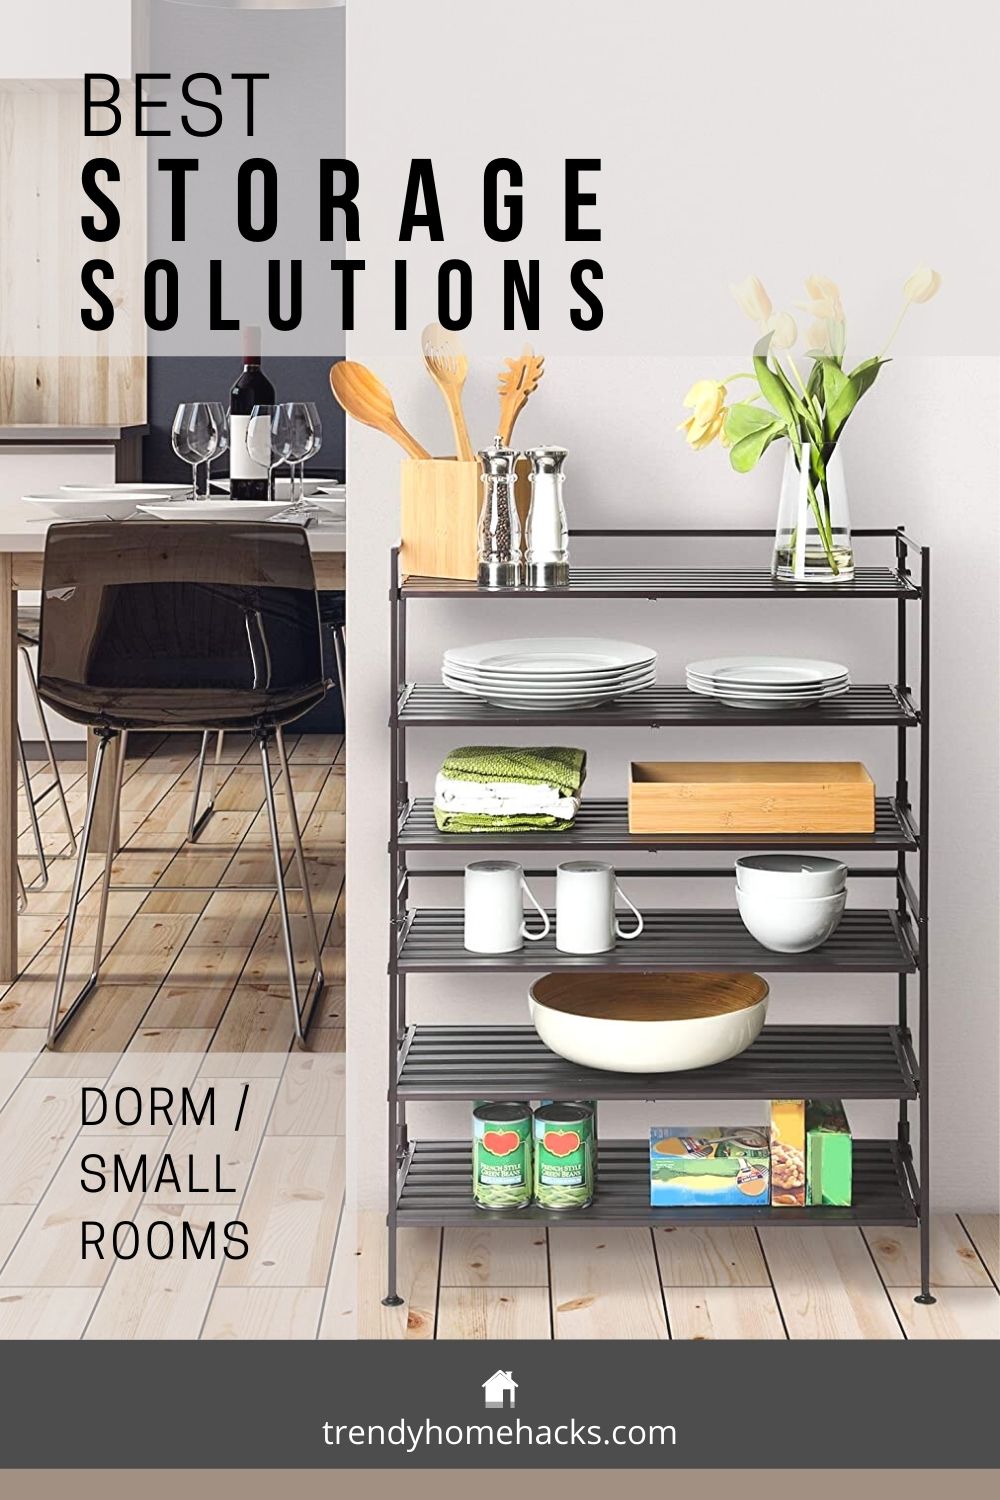 Storage solution for dorm and small rooms